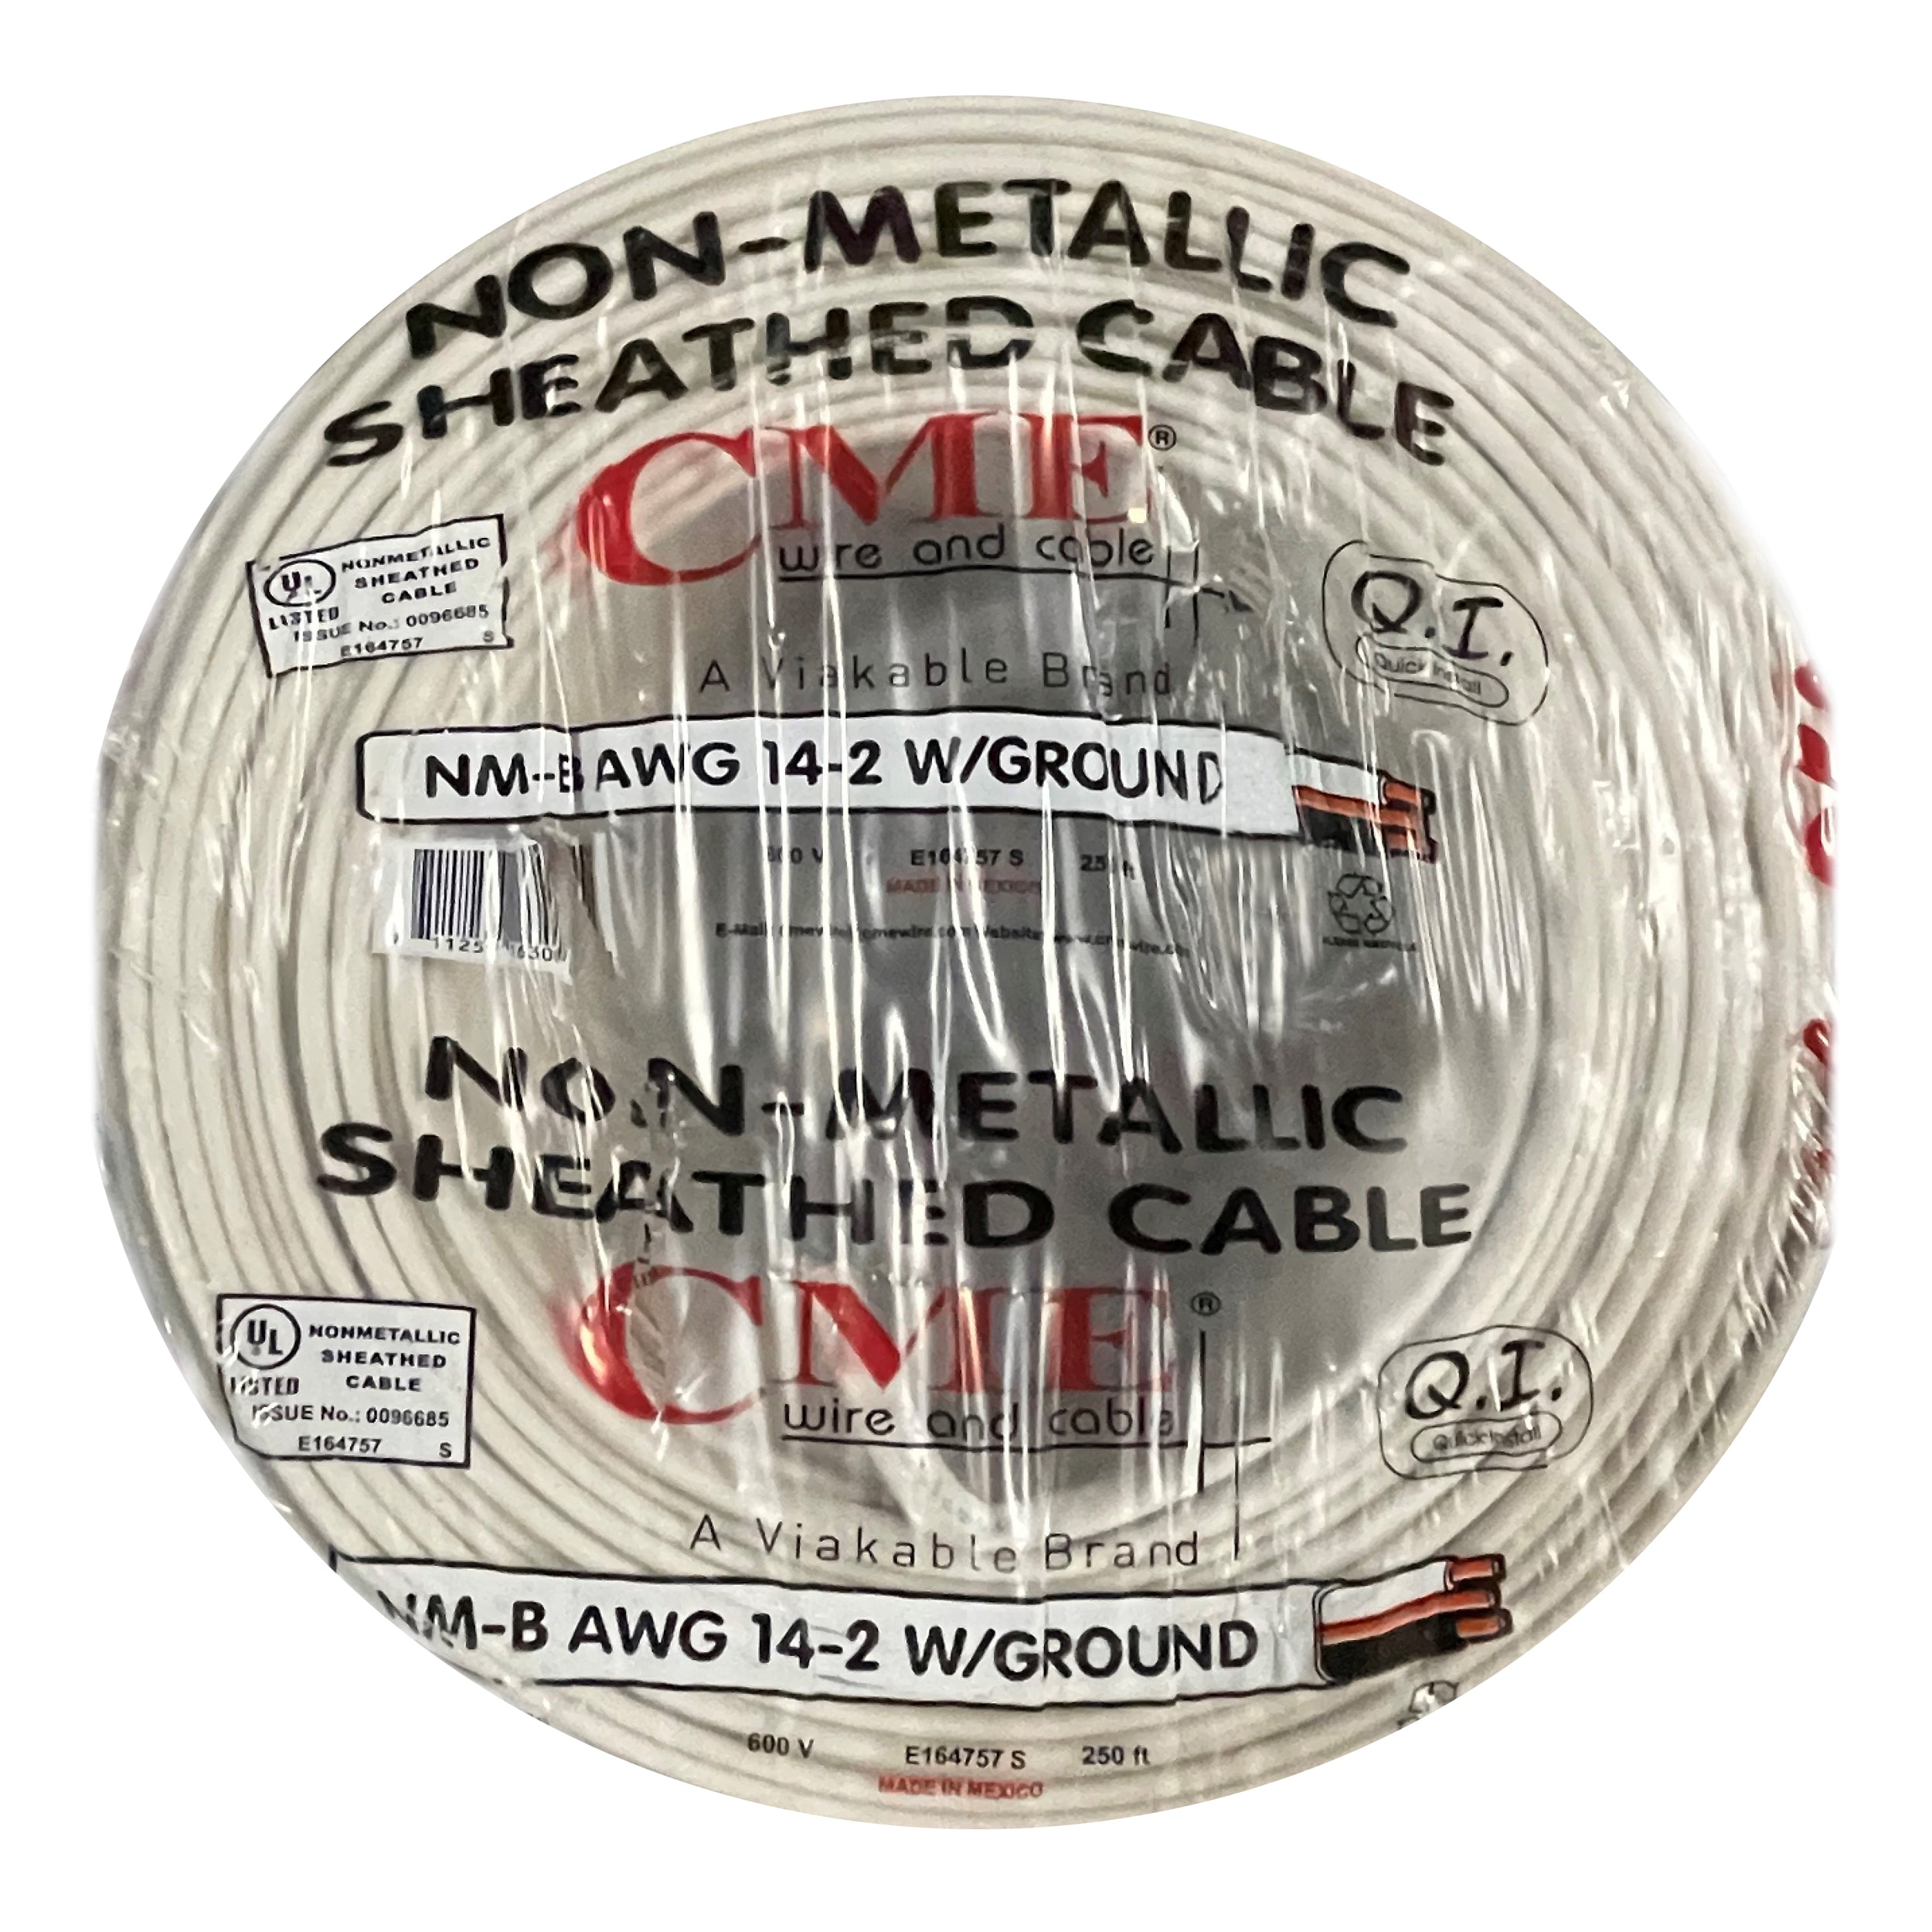 CME Wire & Cable, CME WIRE & CABLE 14/2 + GROUND COPPER BUILDING WIRE, NM-B CABLE, 250-FEET